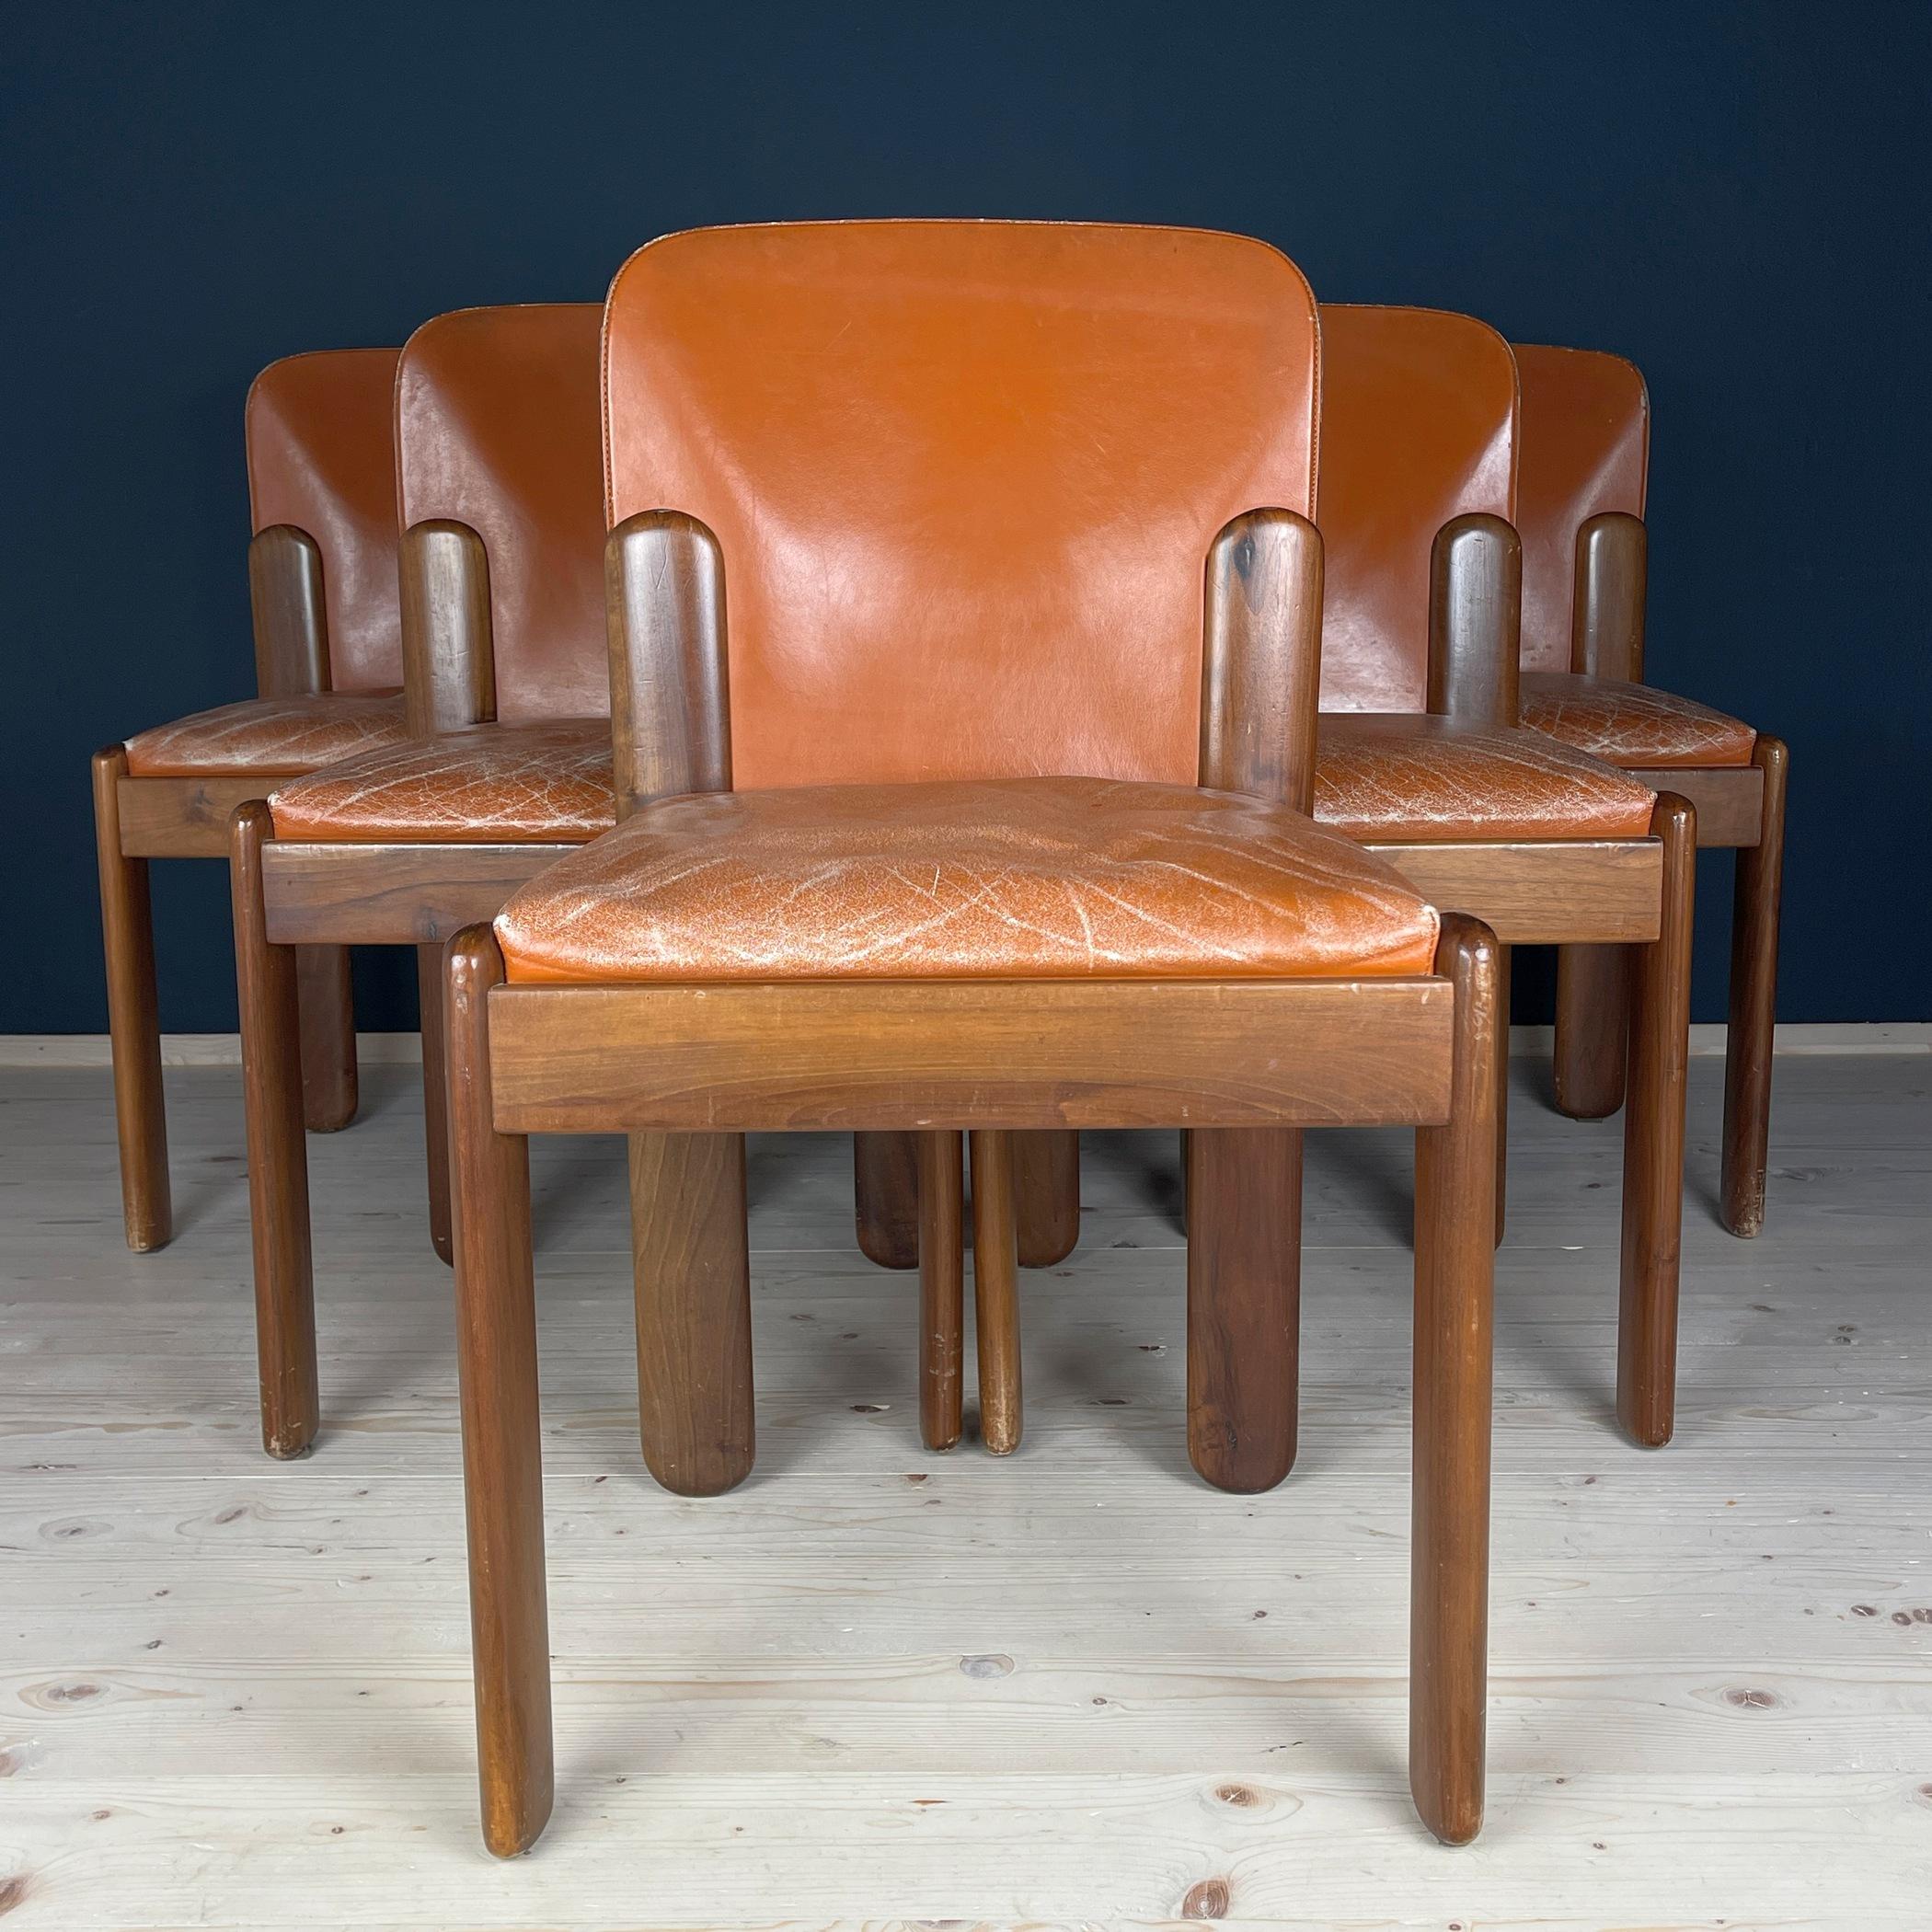 Immerse yourself in the timeless elegance of Italian design with this stunning set of six chairs crafted by Silvio Coppola for Bernini in the 1960s. Model '330' captivates with a visually stylish blend of rich cognac leather and warm walnut wood,